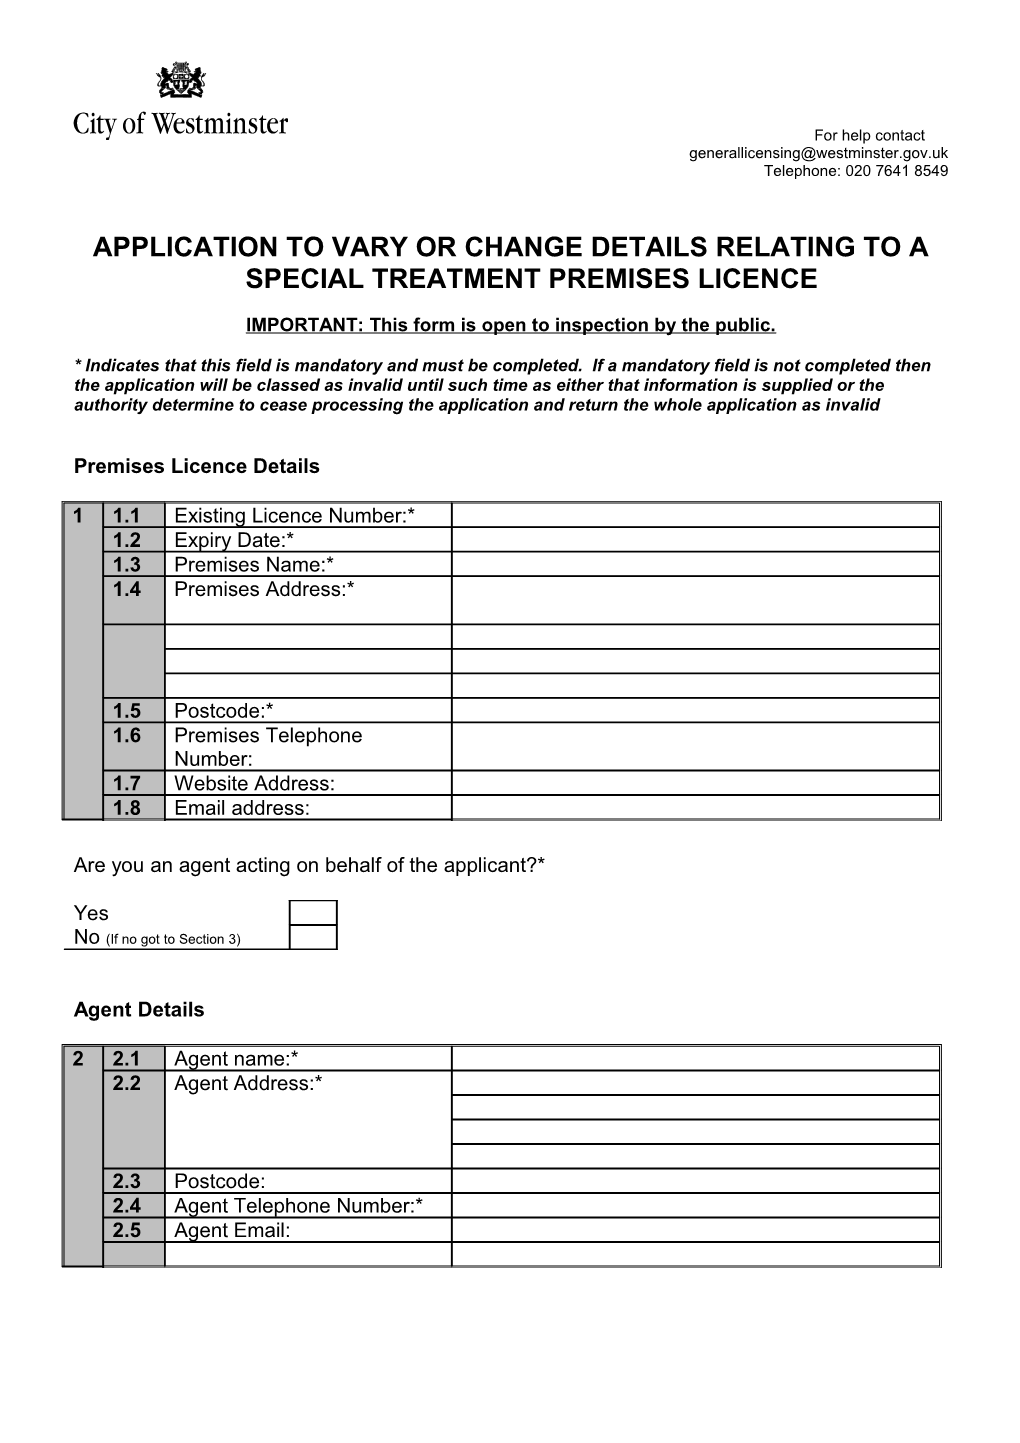 Application to Varyor Change Details Relating to a SPECIAL Treatmentpremises LICENCE